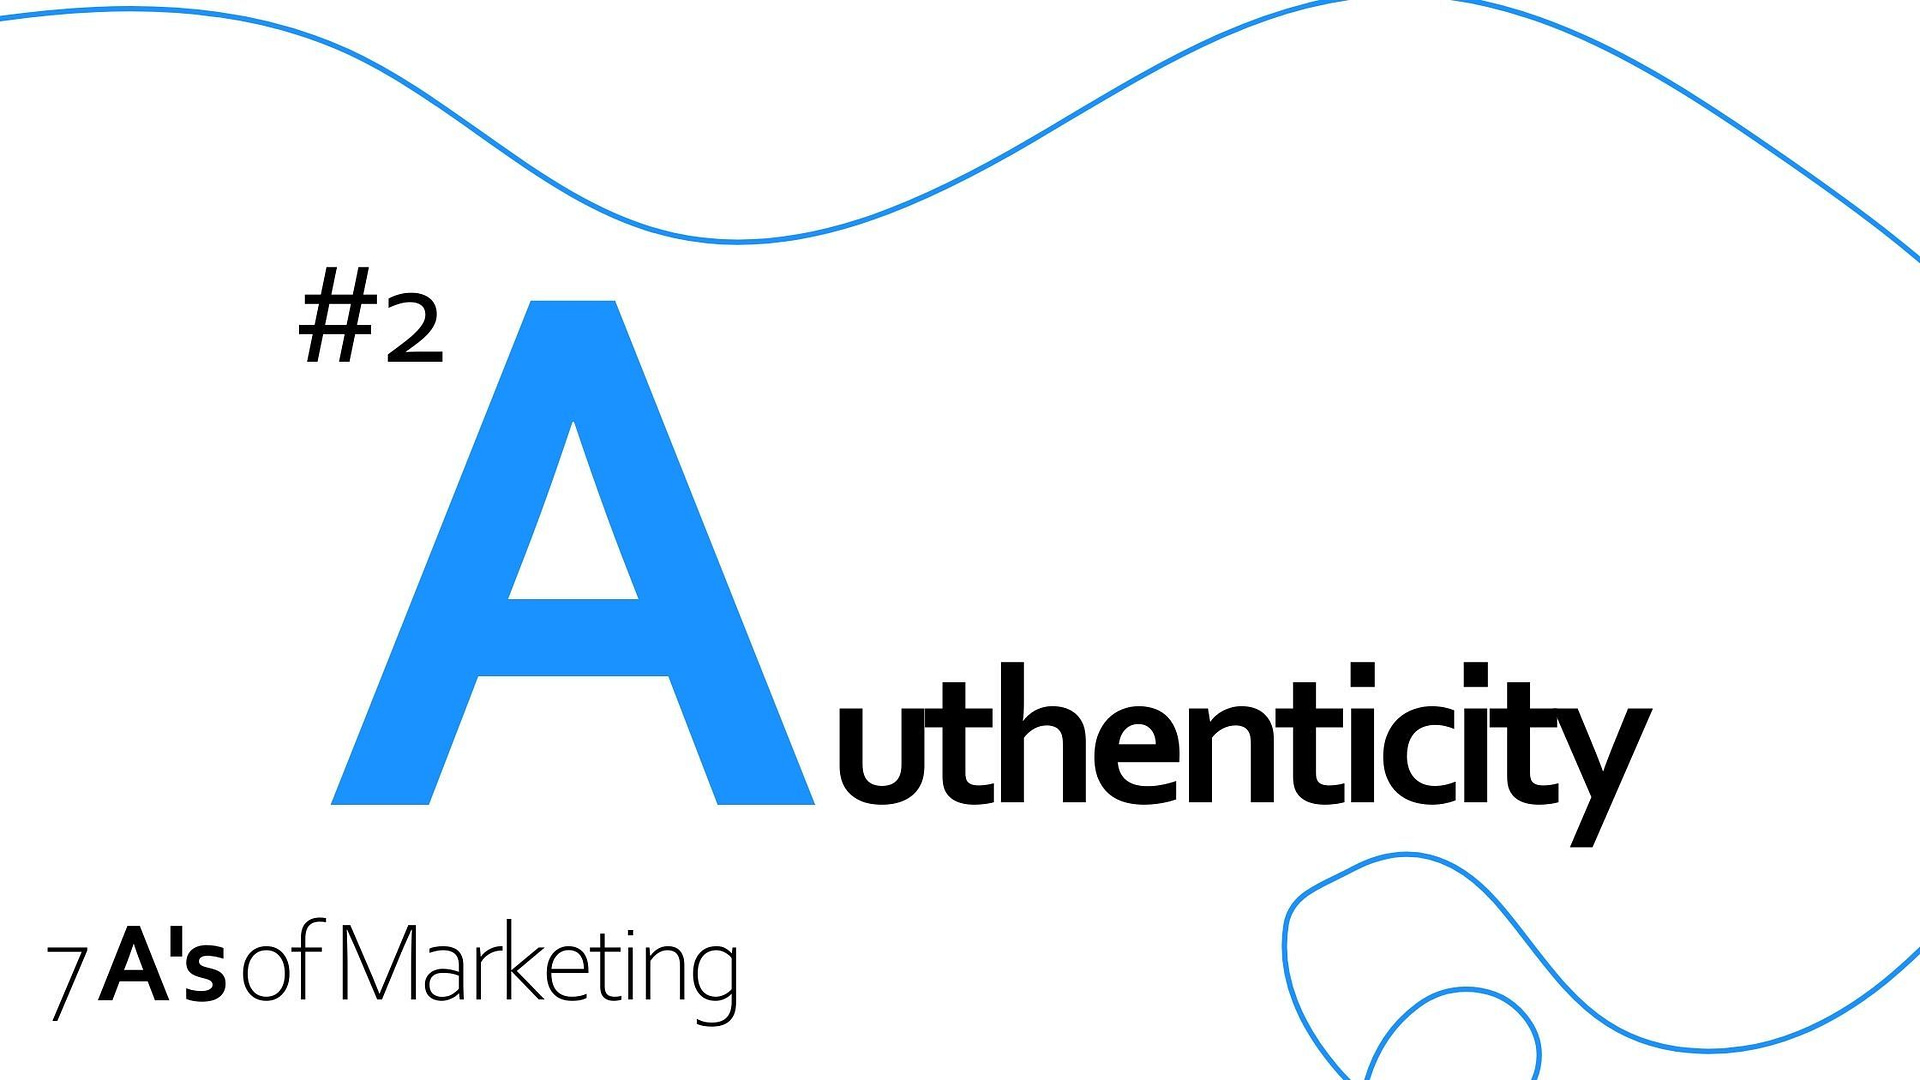 7 A's of Marketing - #2 Authenticity